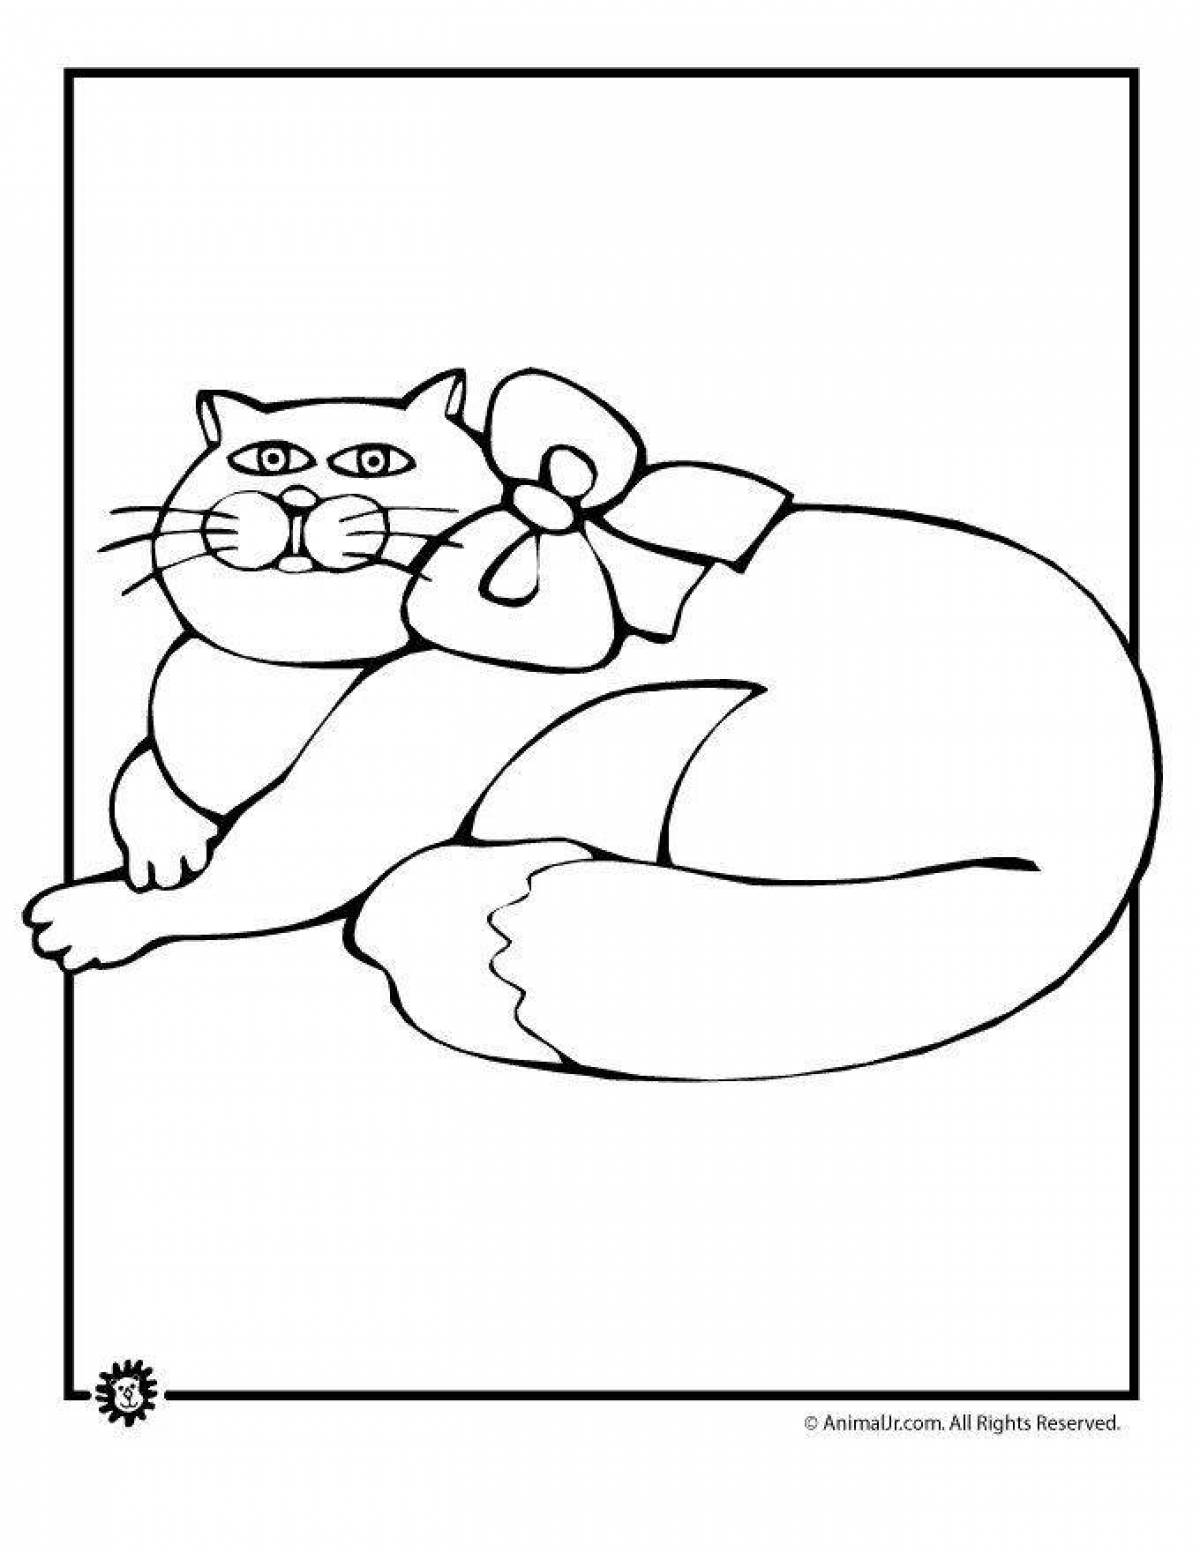 Coloring page cozy fat cat